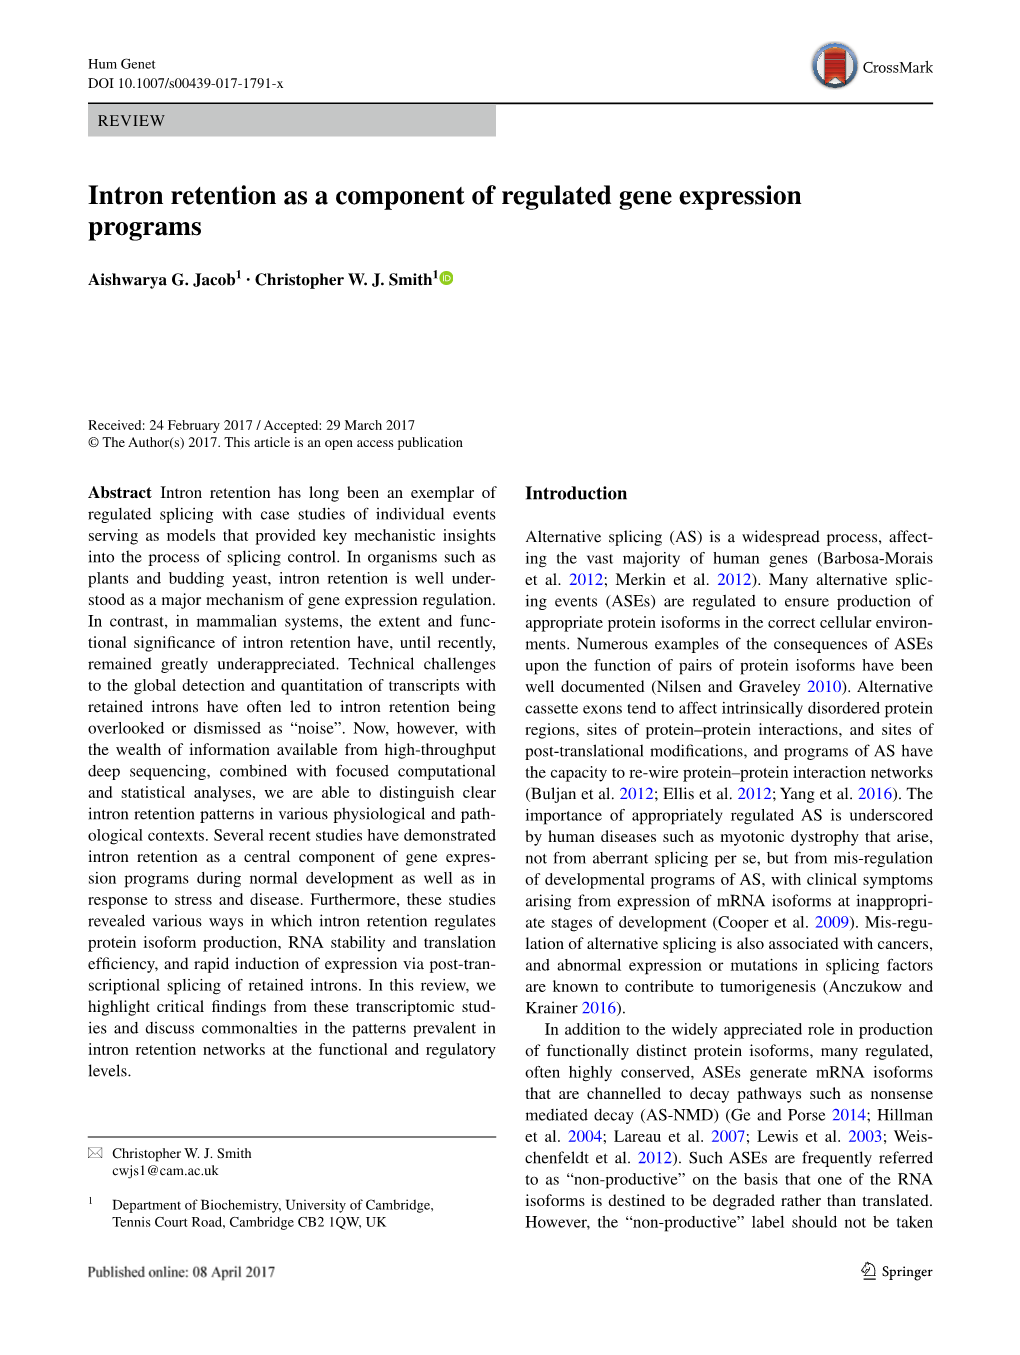 Intron Retention As a Component of Regulated Gene Expression Programs